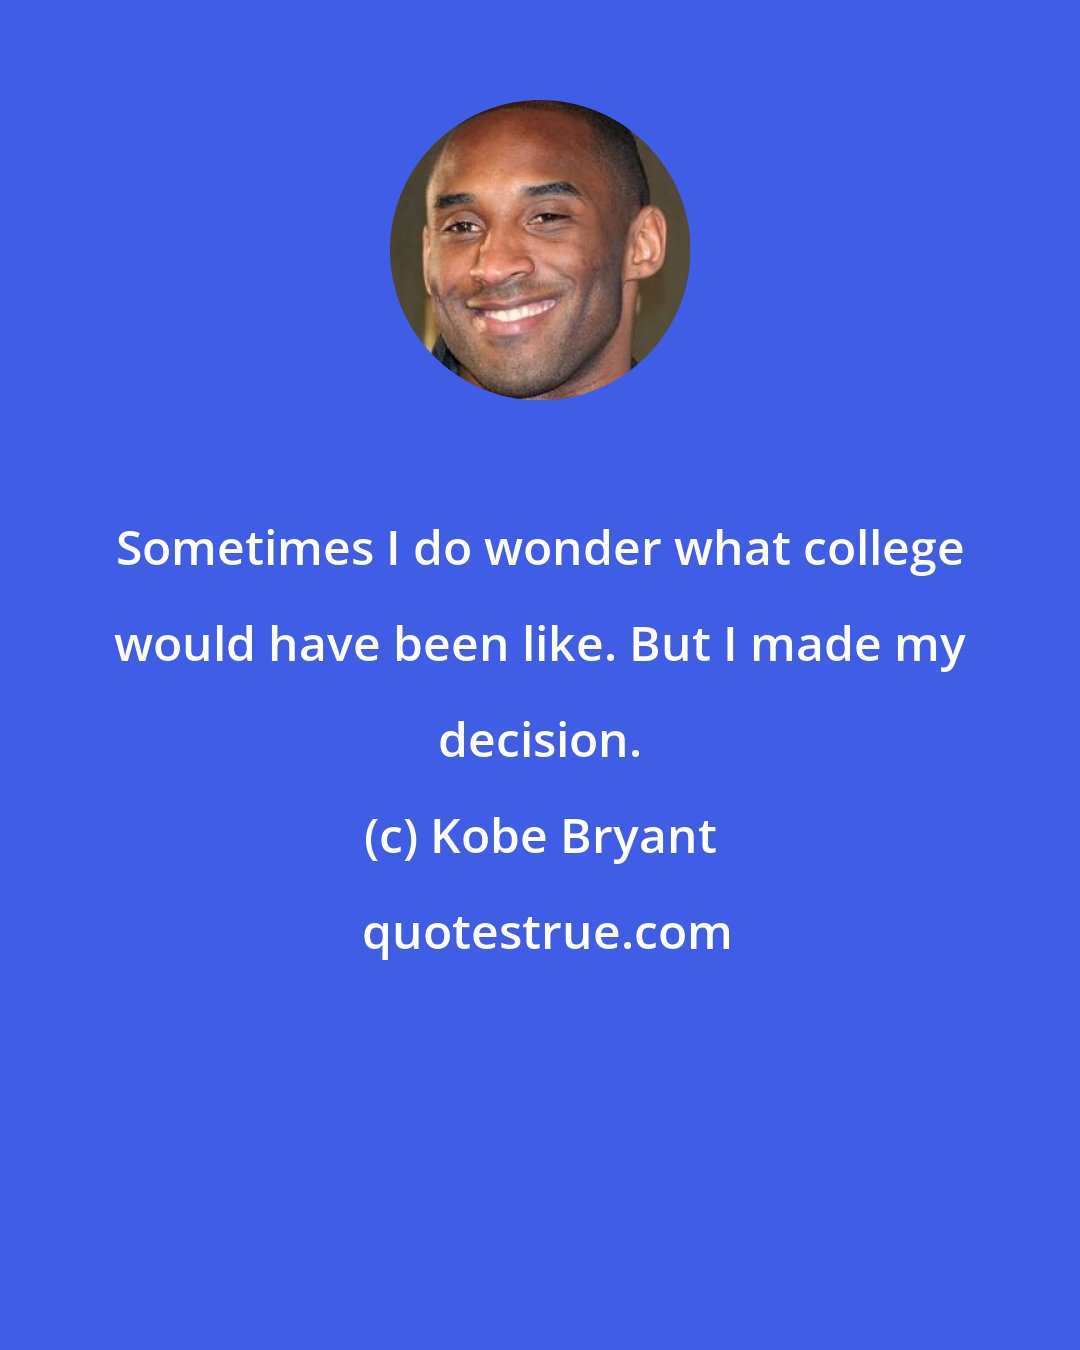 Kobe Bryant: Sometimes I do wonder what college would have been like. But I made my decision.